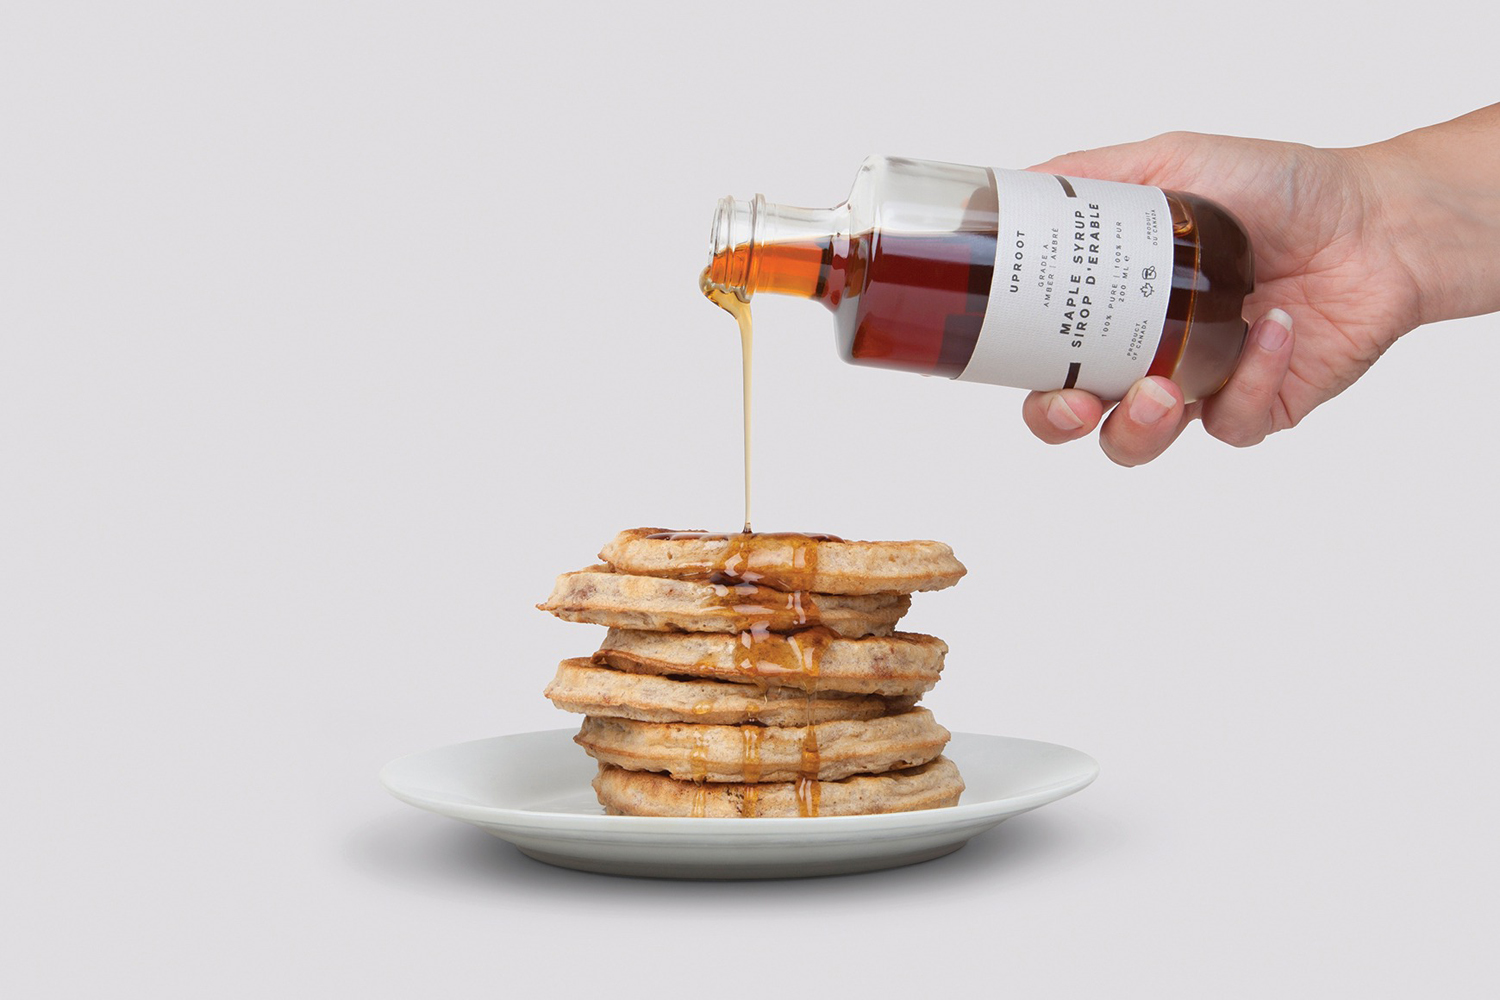 Premium maple syrup and packaging to celebrate UK-based graphic design studio Believe in's expansion into Canada